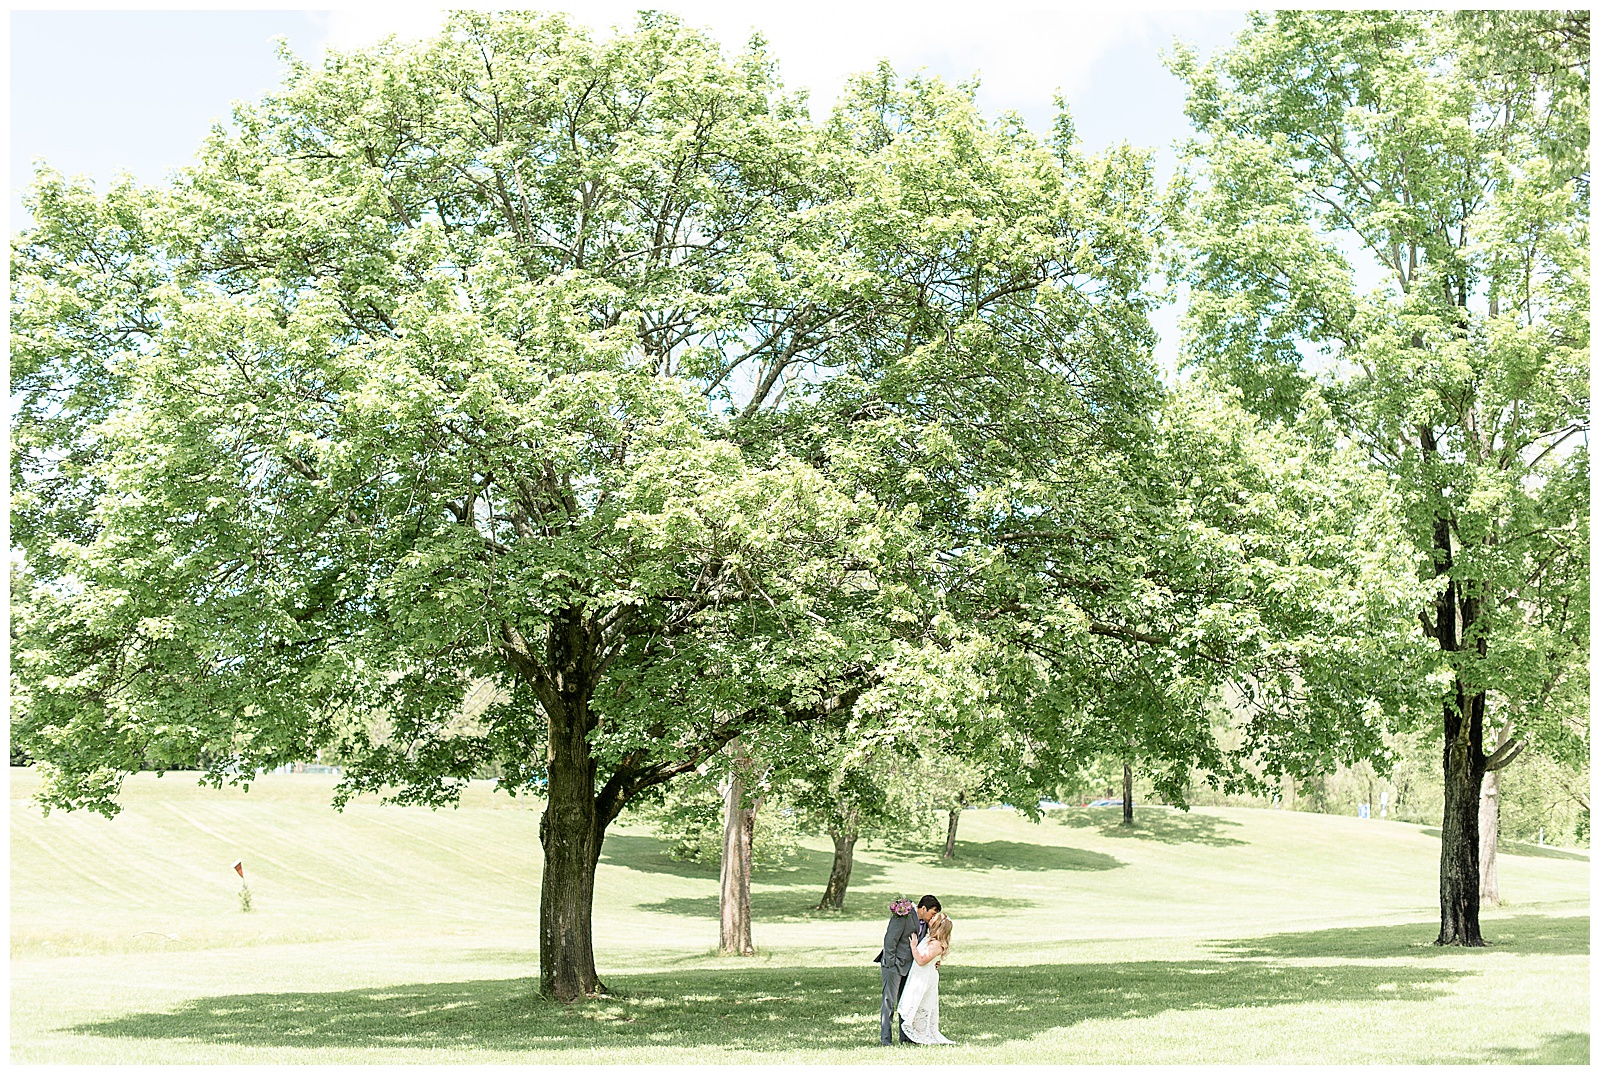 couple kissing under large trees in open grass area